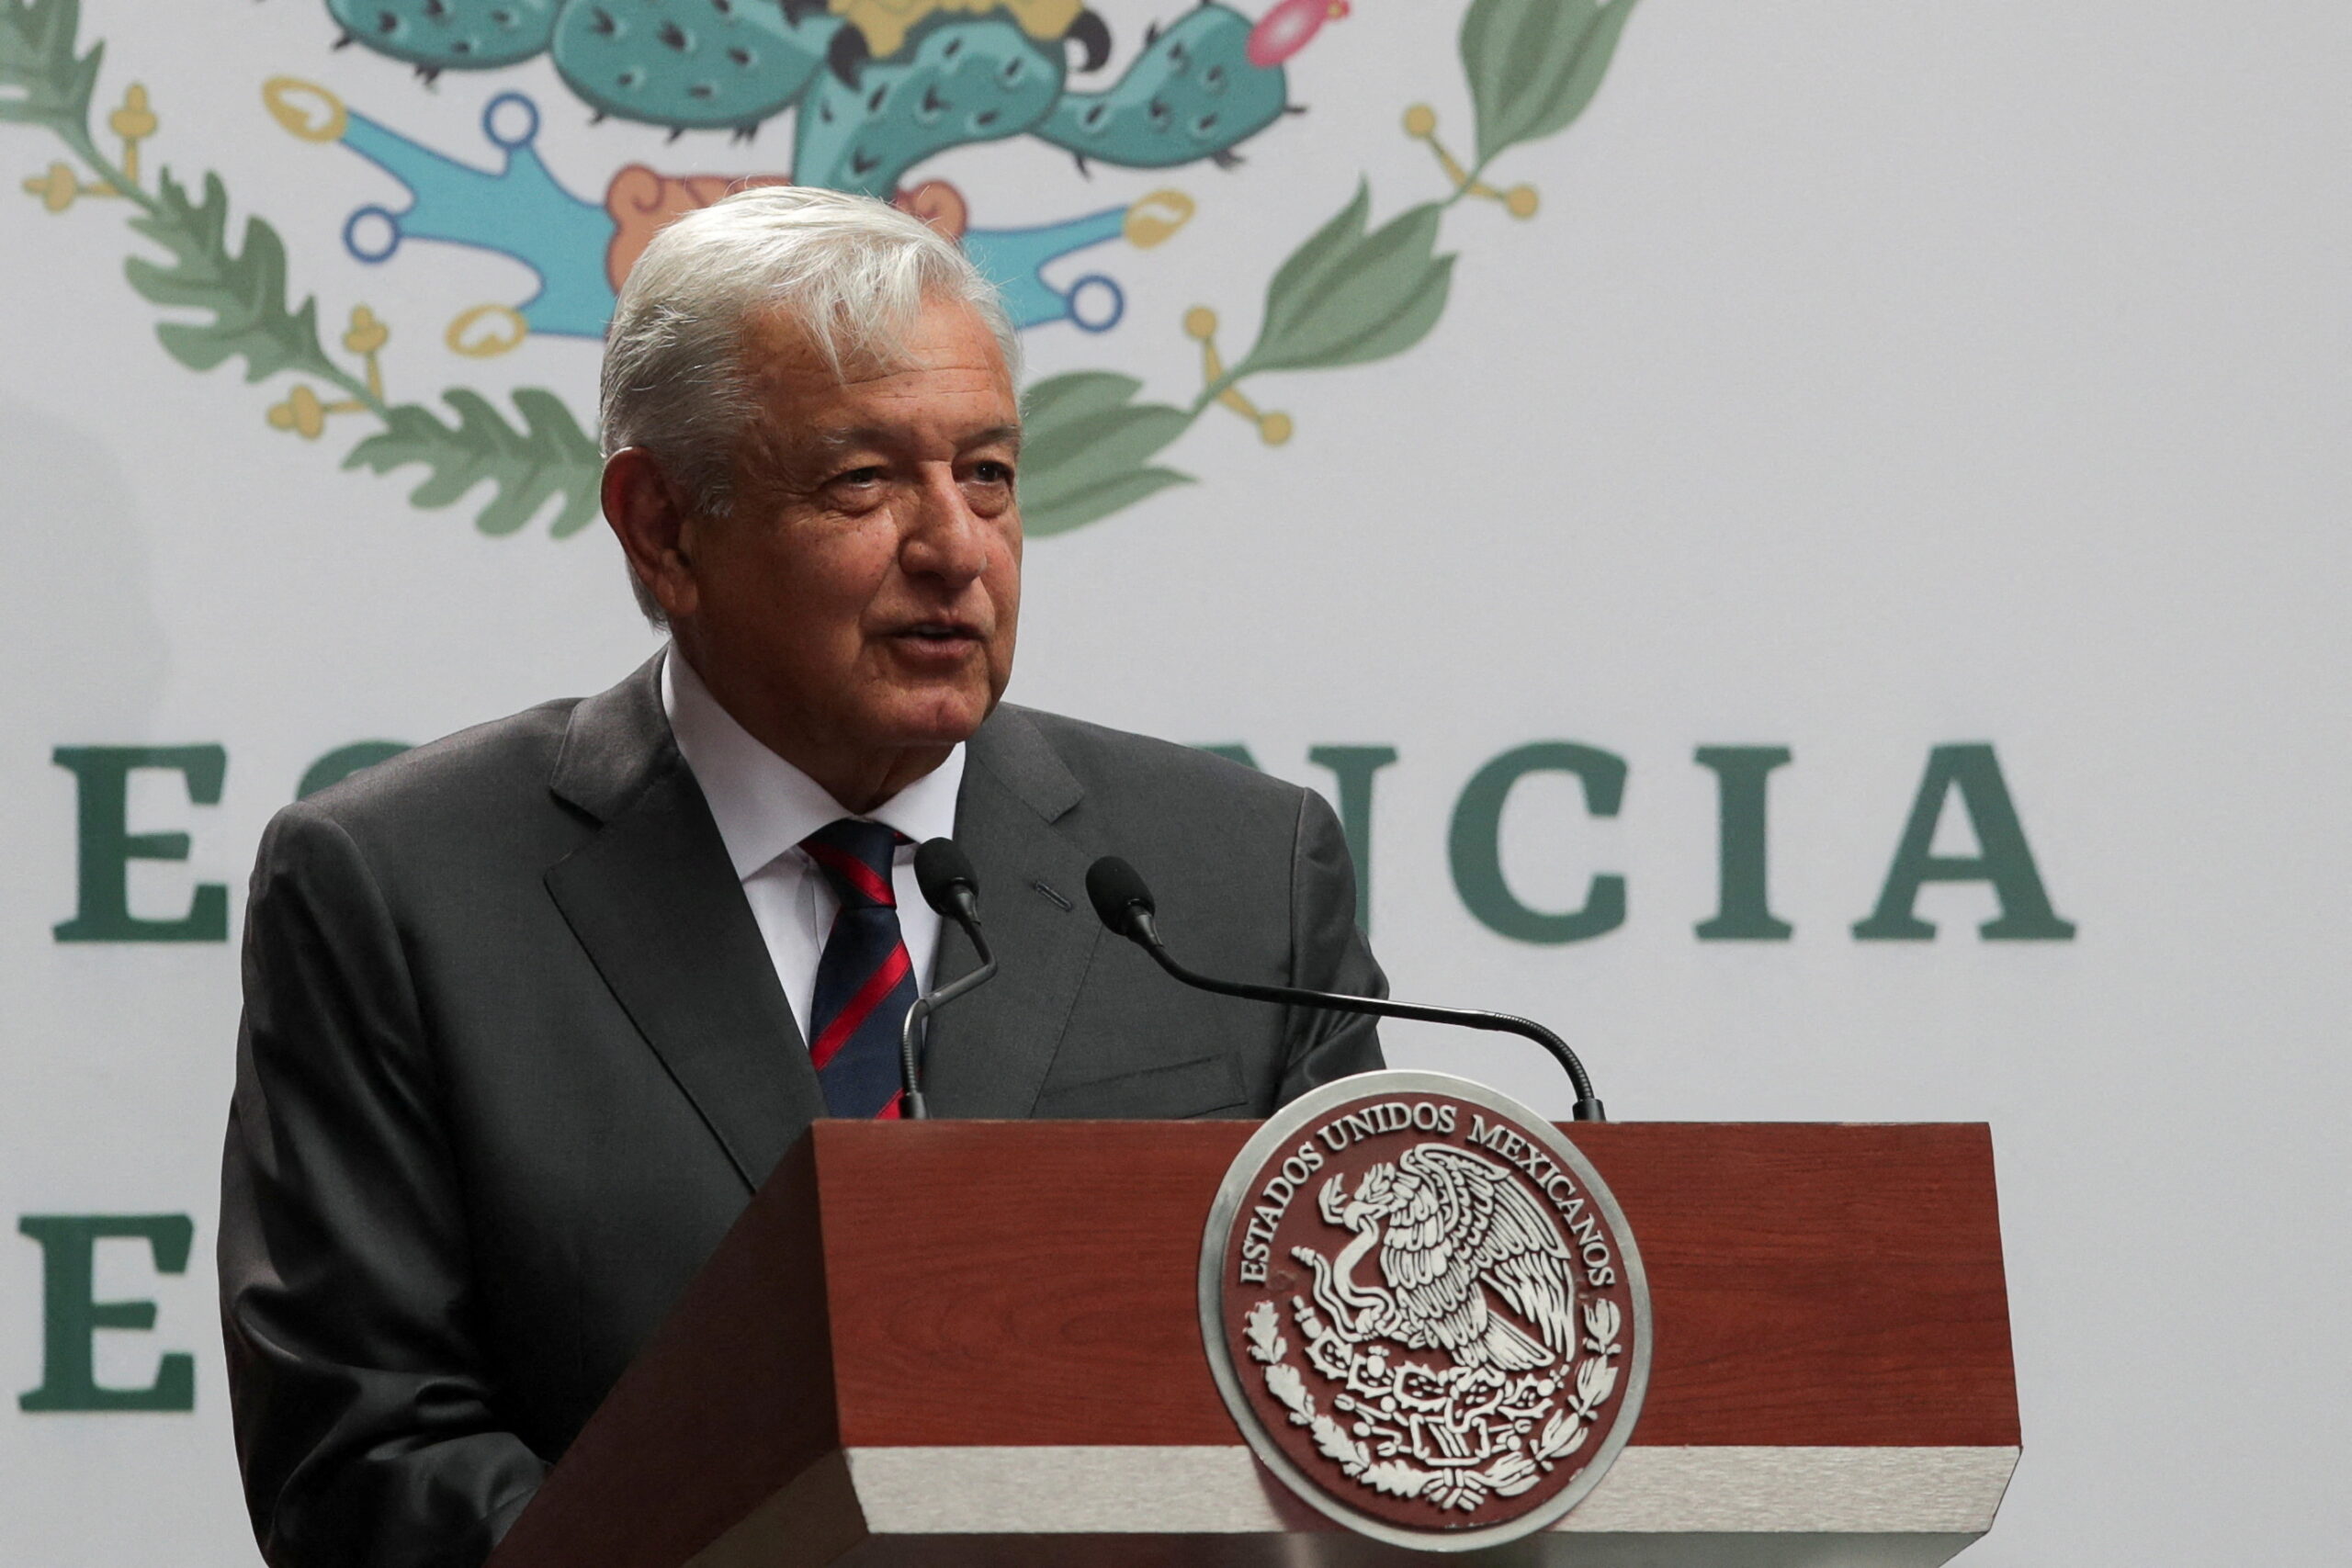 Meet The New President Of Mexico: A Closer Look At Mexico's Latest Leader